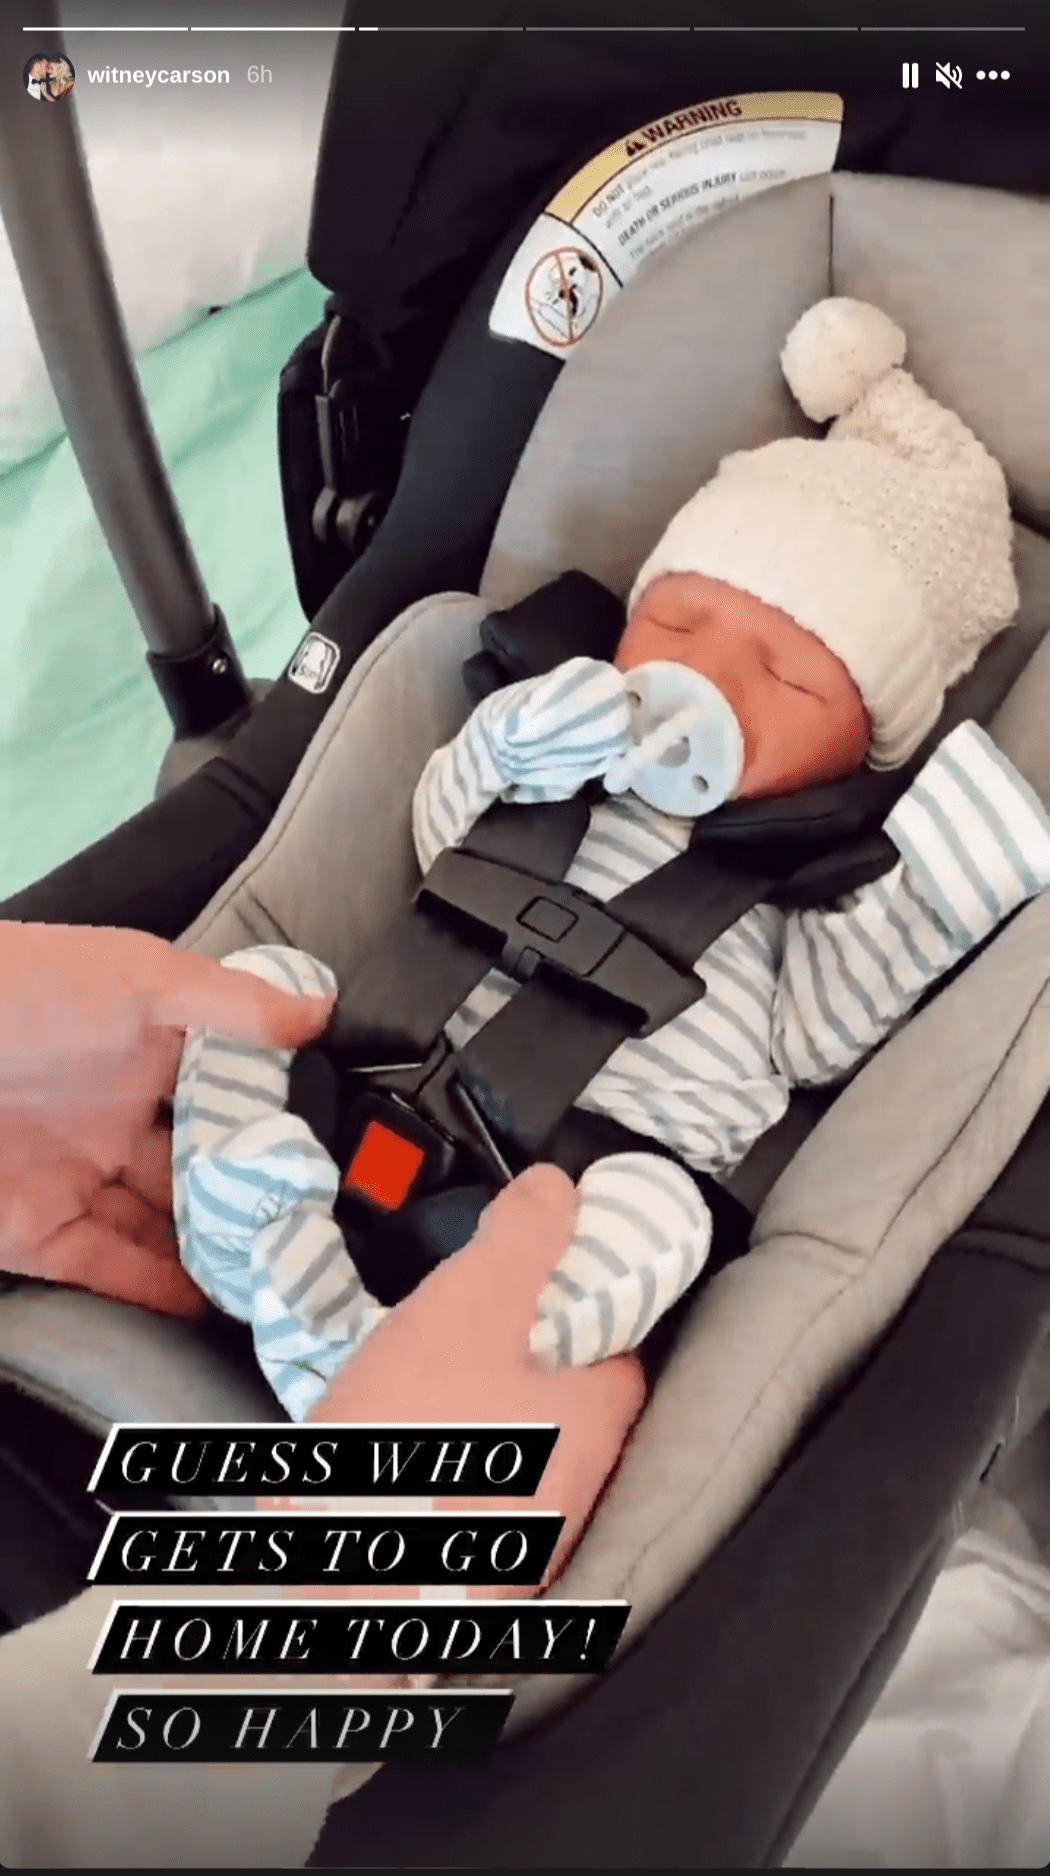 Witney Carson is excitedly taking her newborn son home for the first time on January 7, 2020. | Source: Instagram/witneycarson.